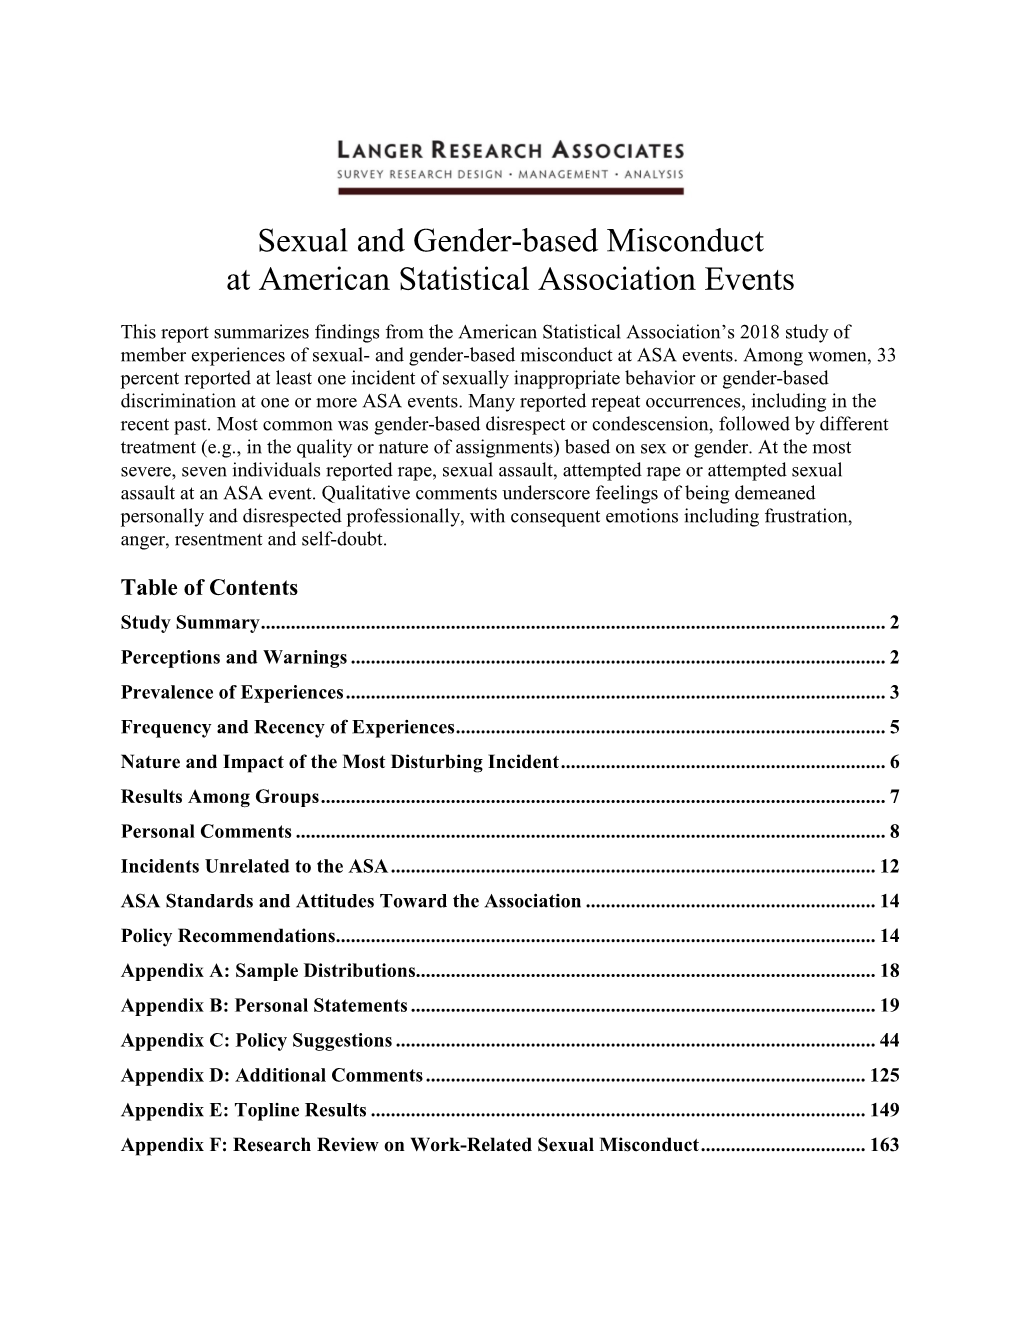 Sexual and Gender-Based Misconduct at American Statistical Association Events